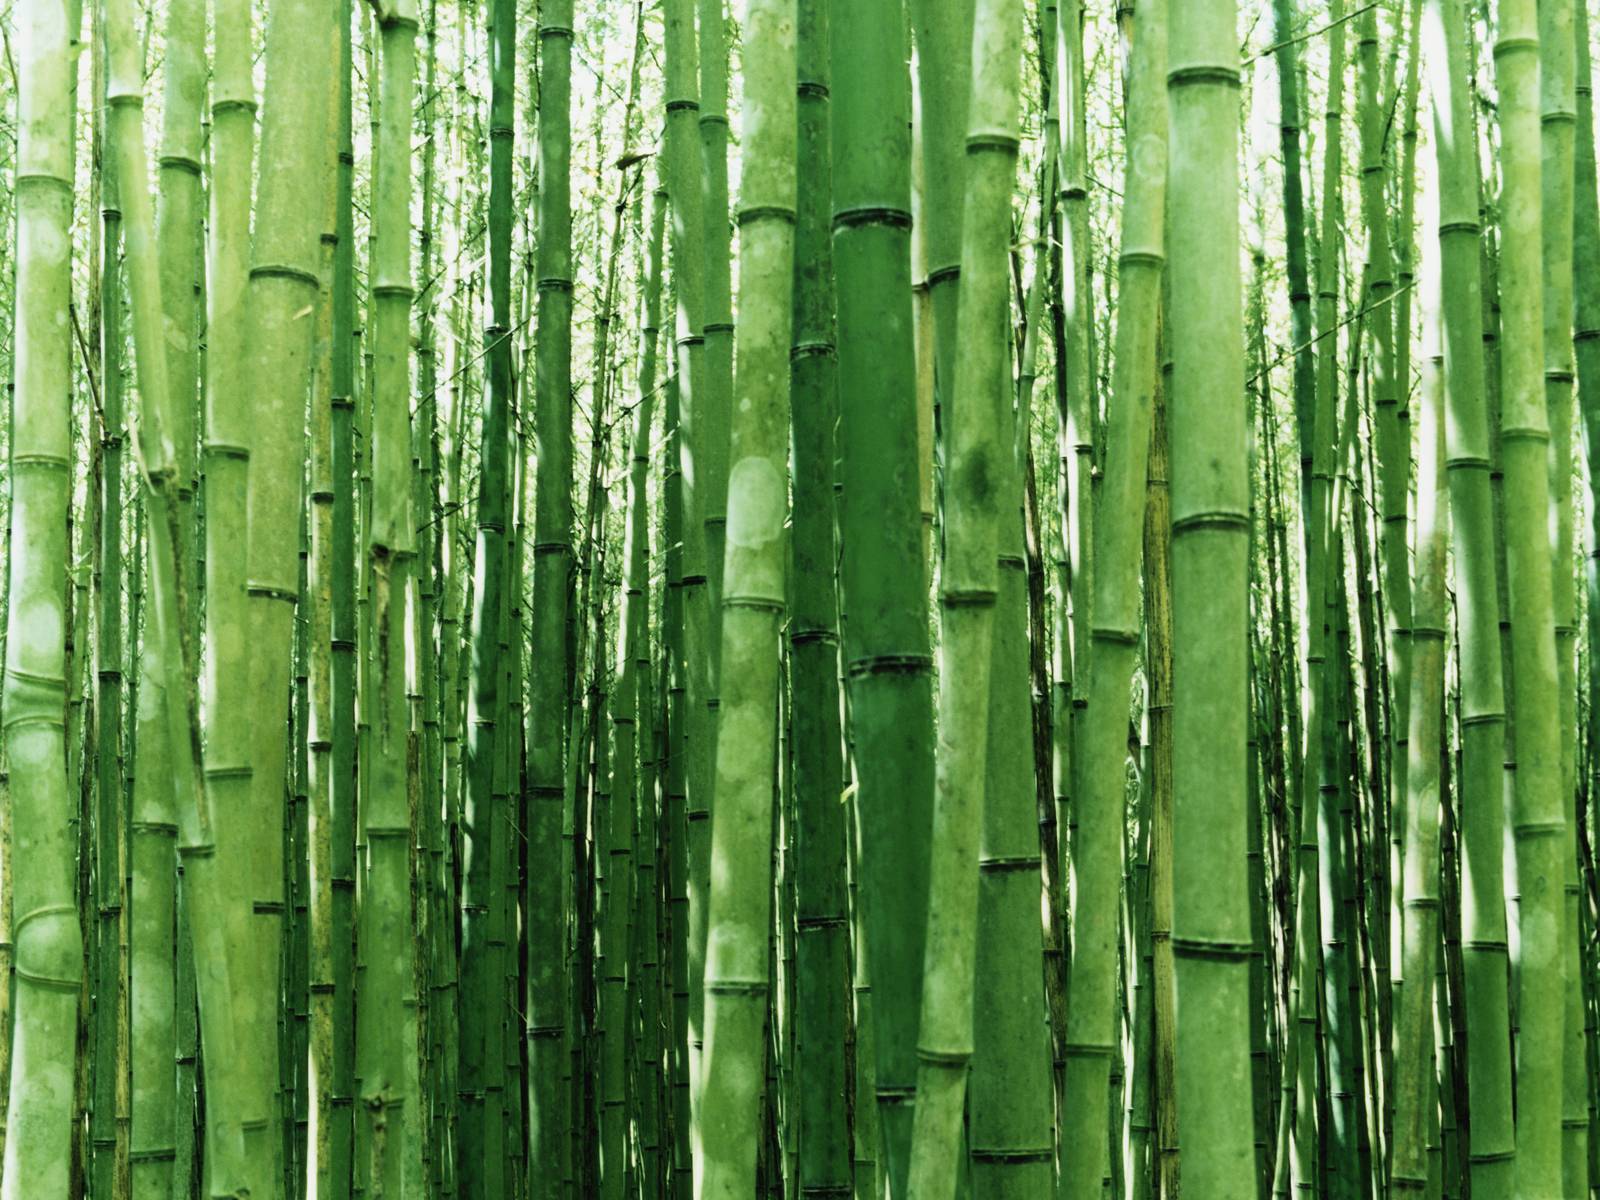 bamboo paper windows 10 download